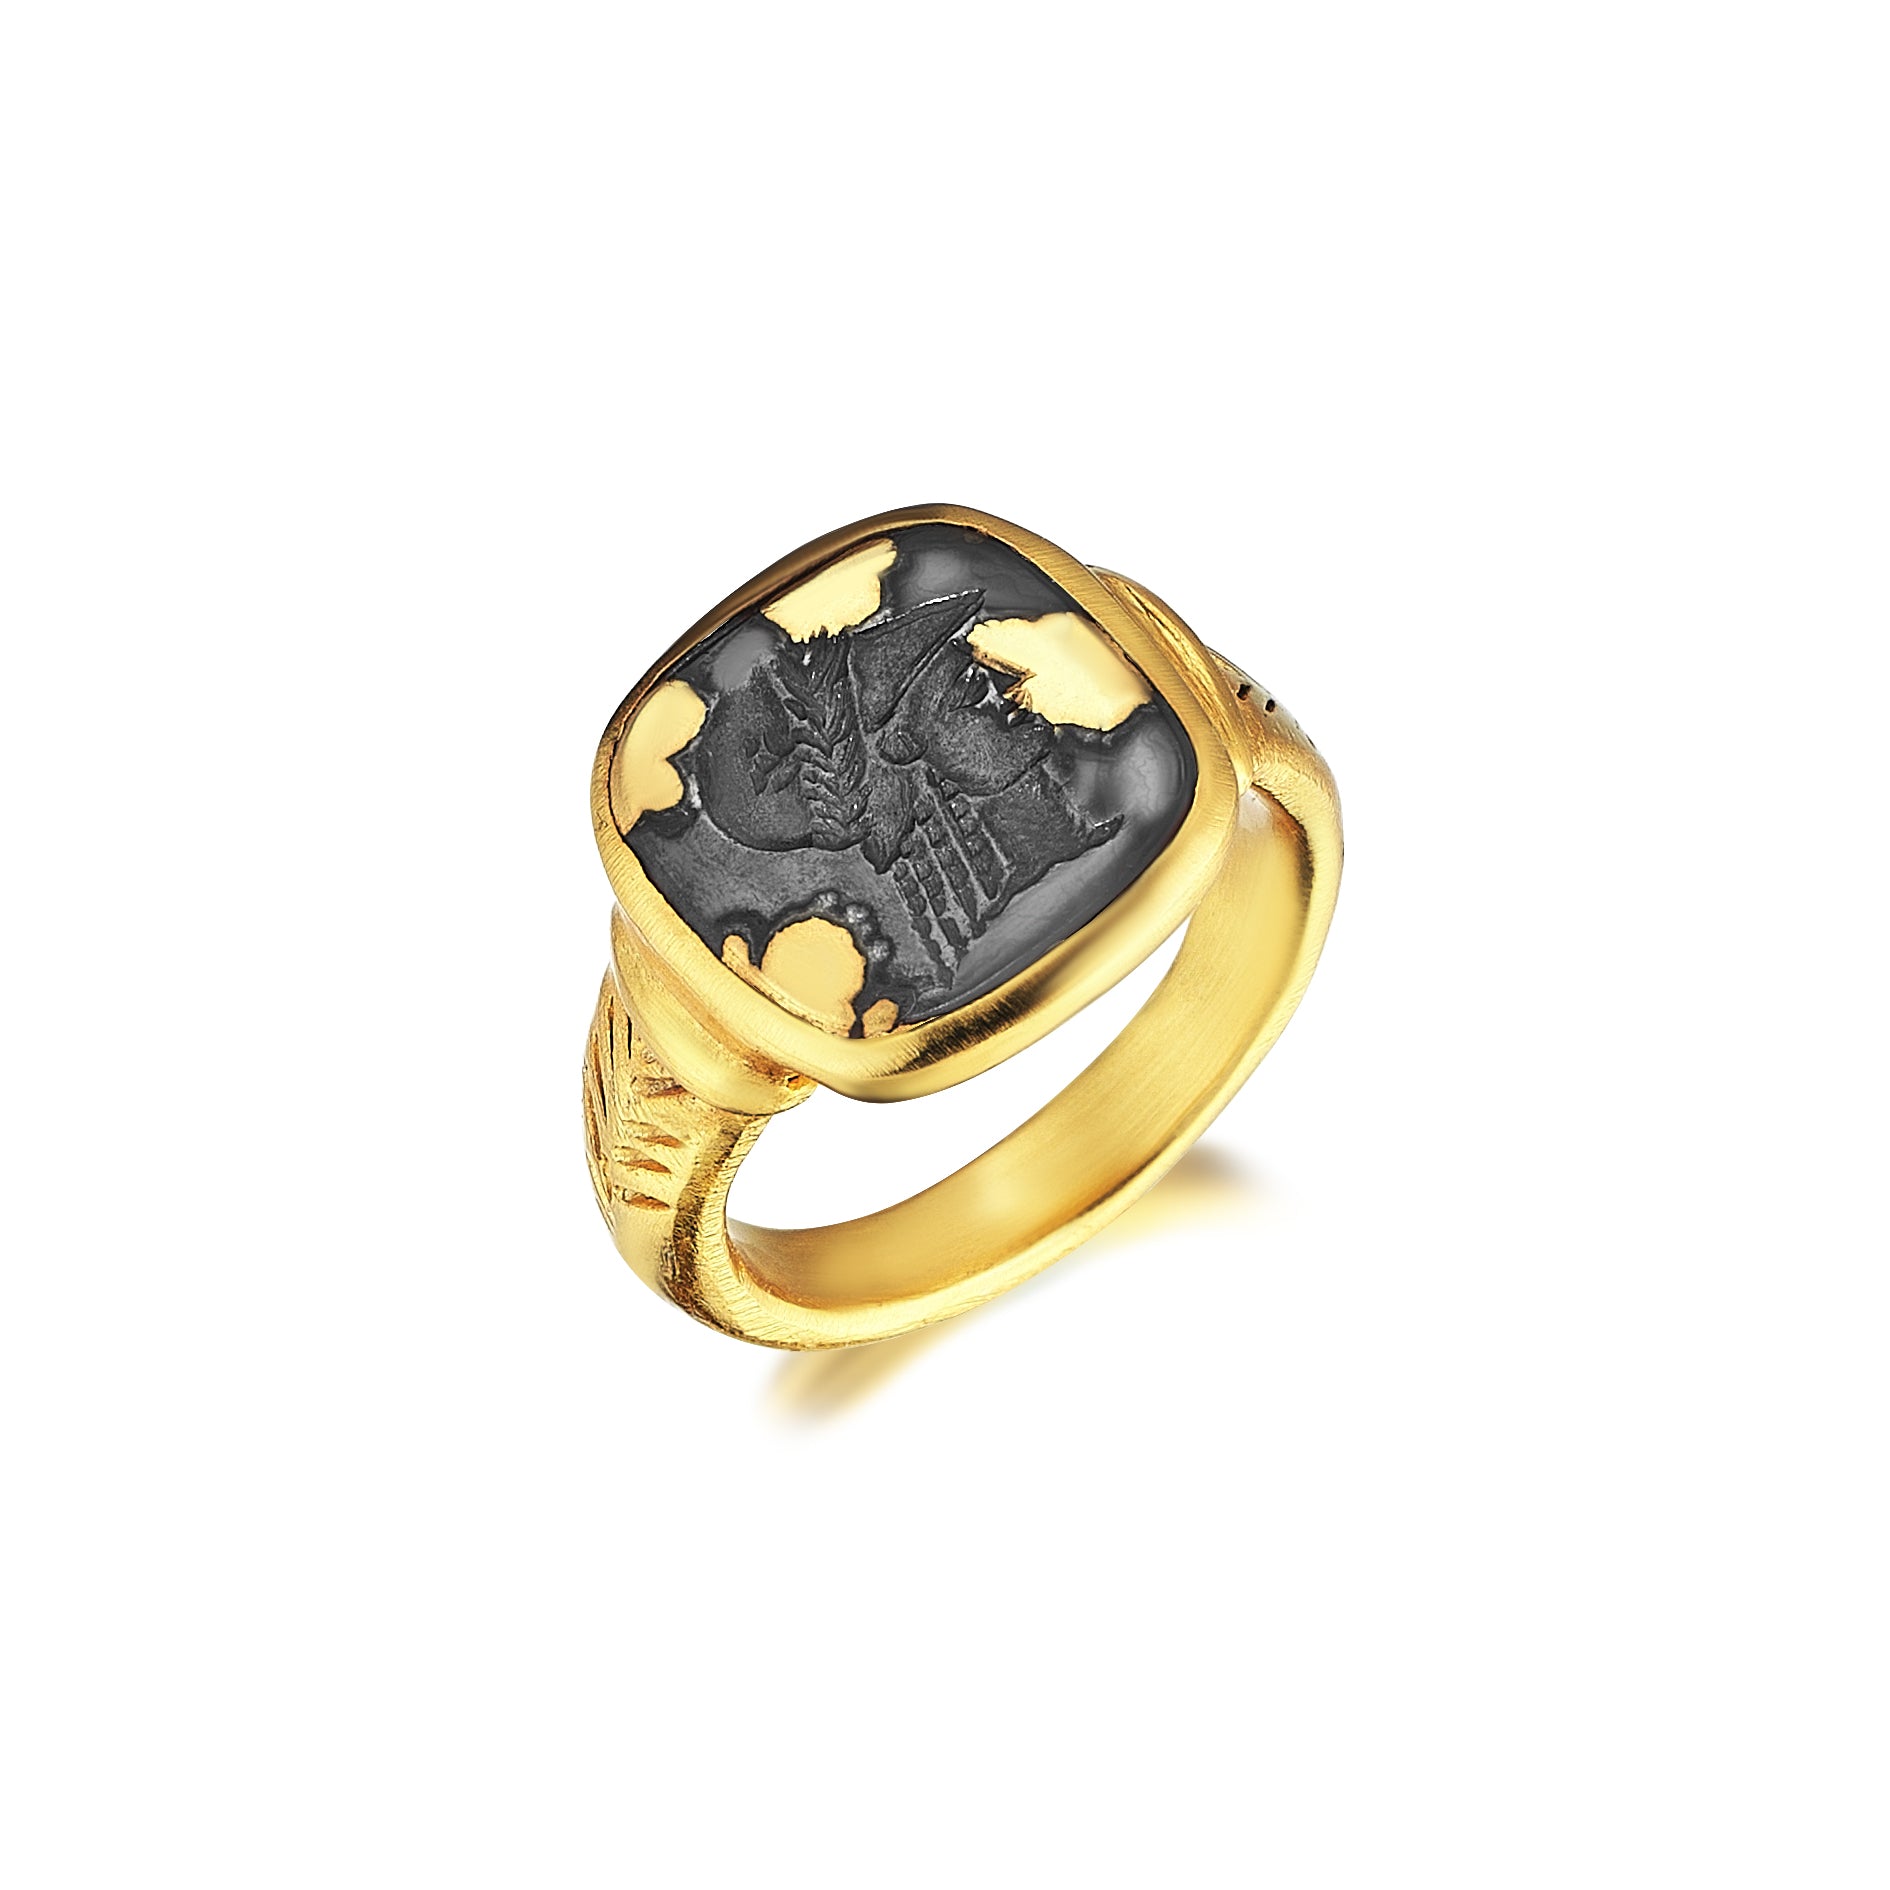 THE GOLD FLAKE RING